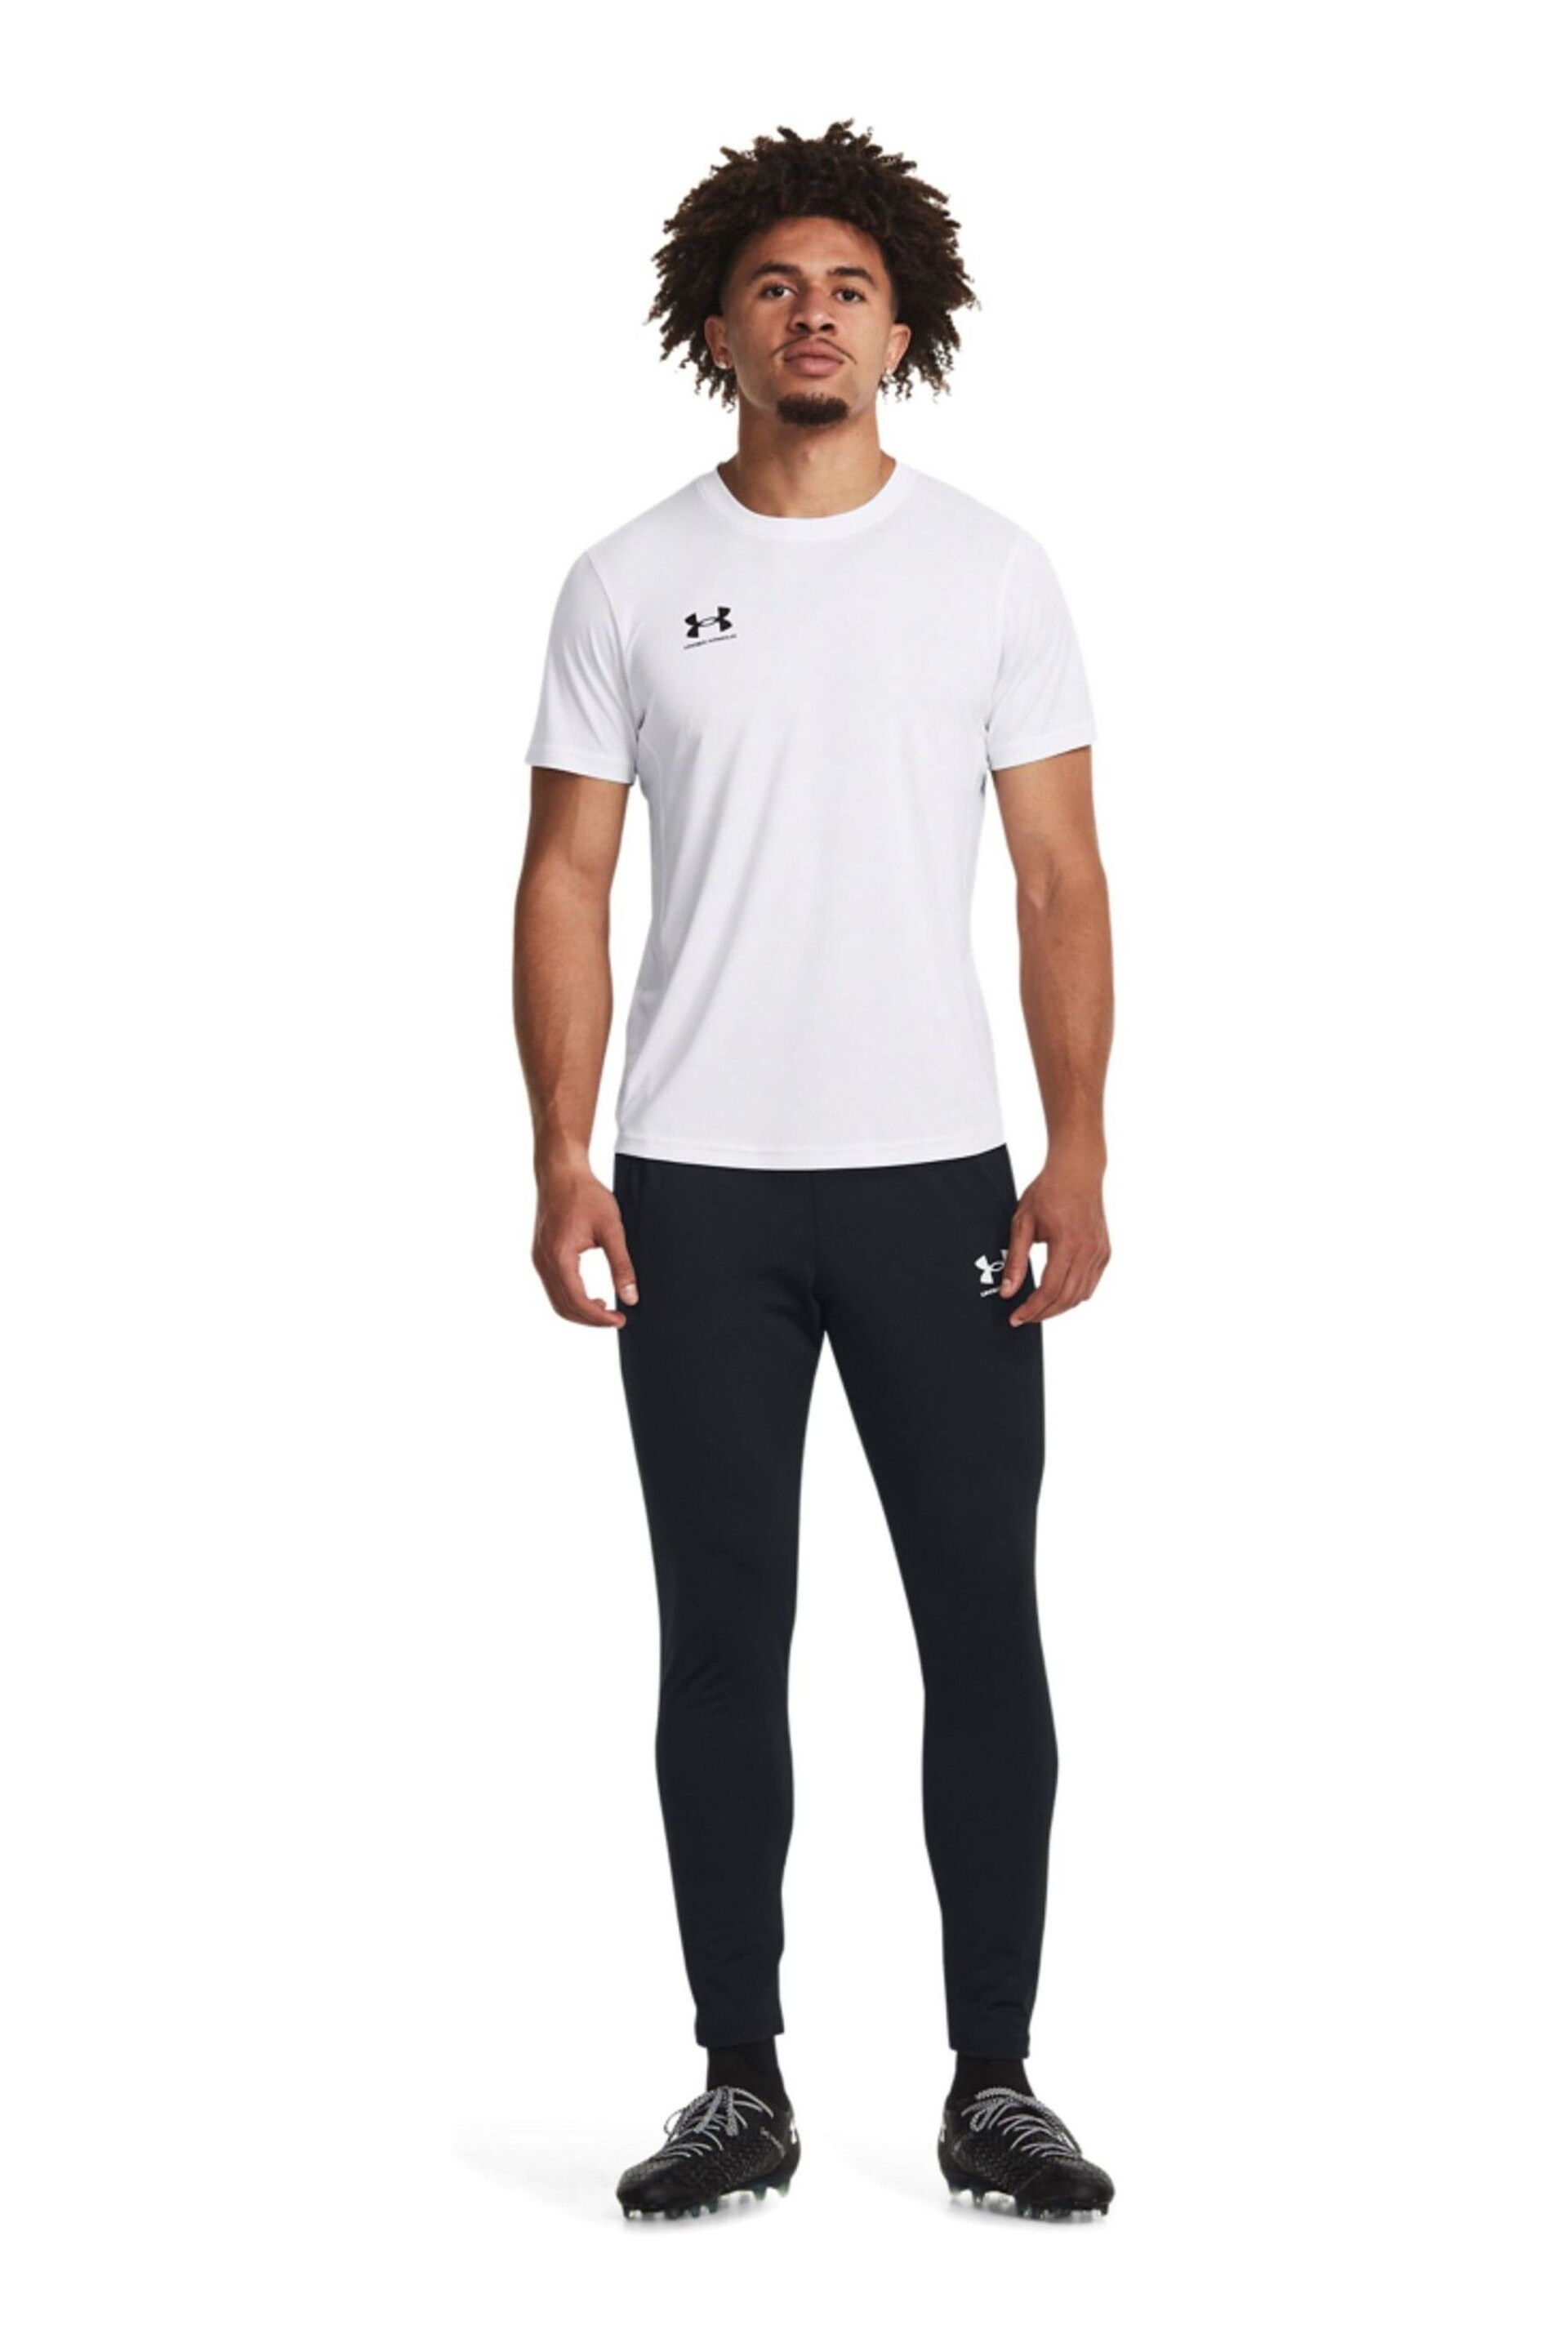 Under Armour White Challenger Train Short Sleeve T-Shirt - Image 3 of 6